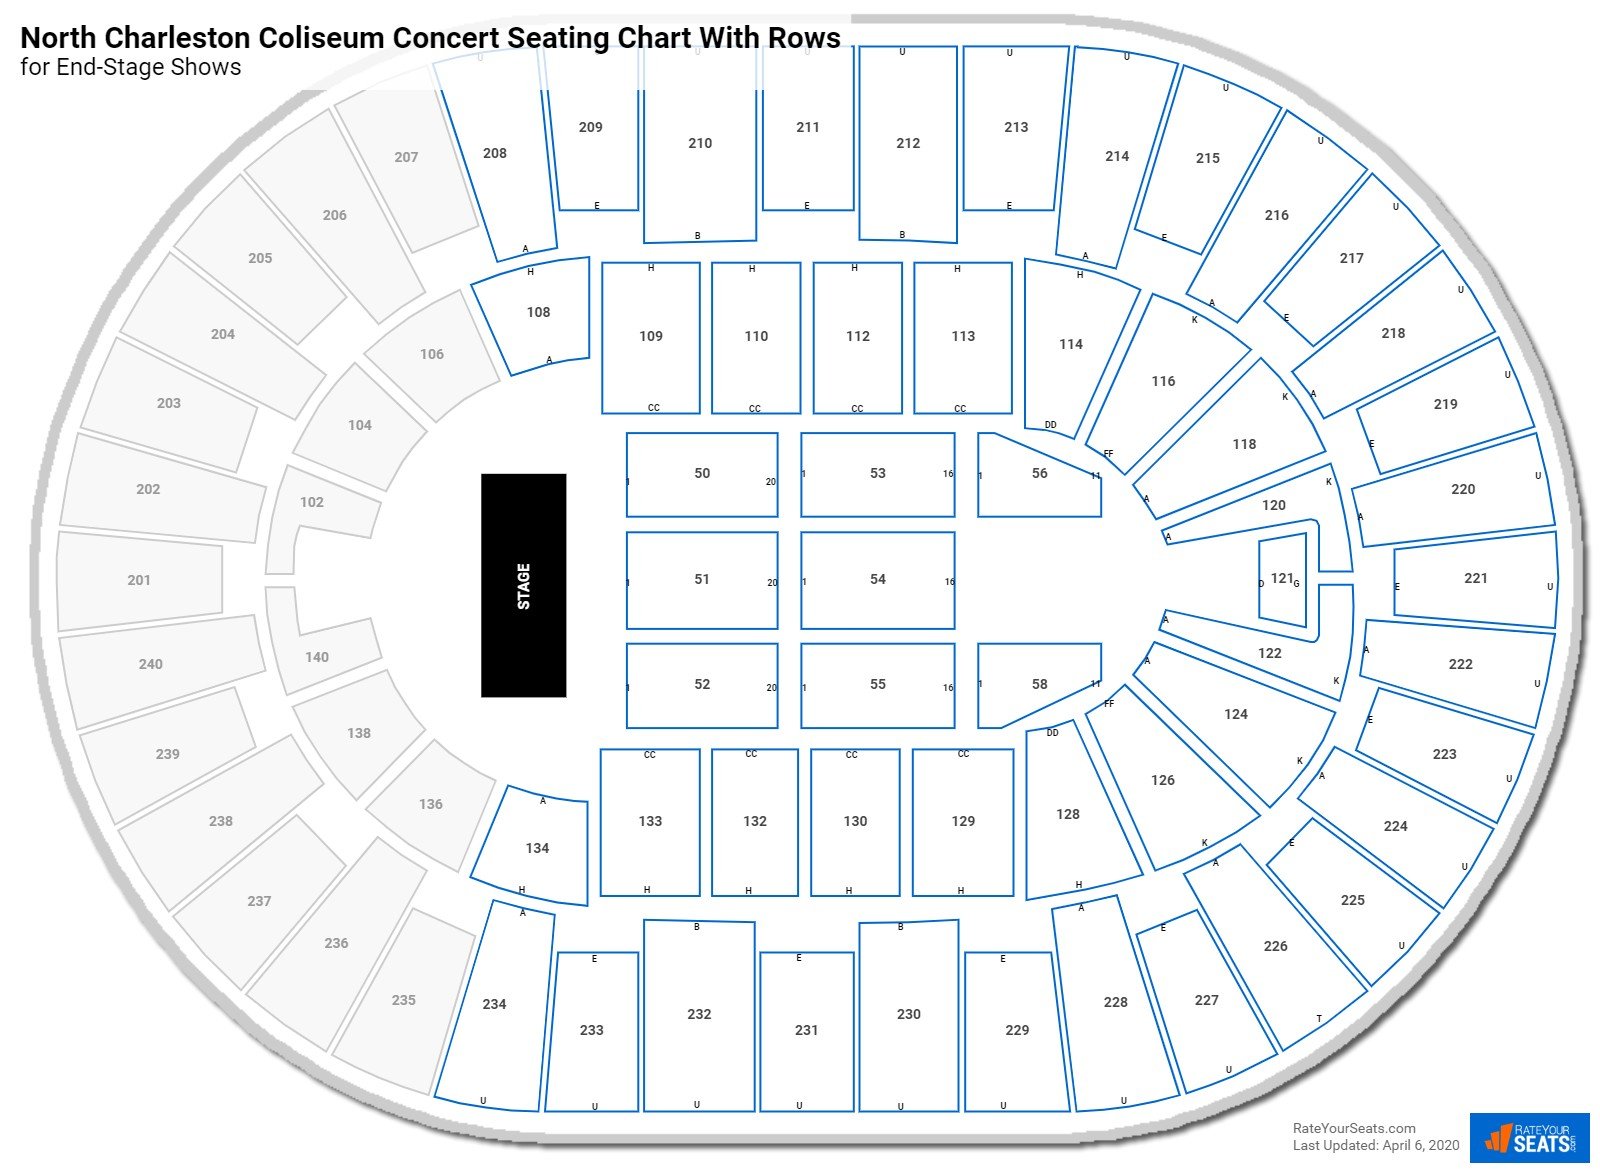 North Charleston Coliseum seating chart with row numbers